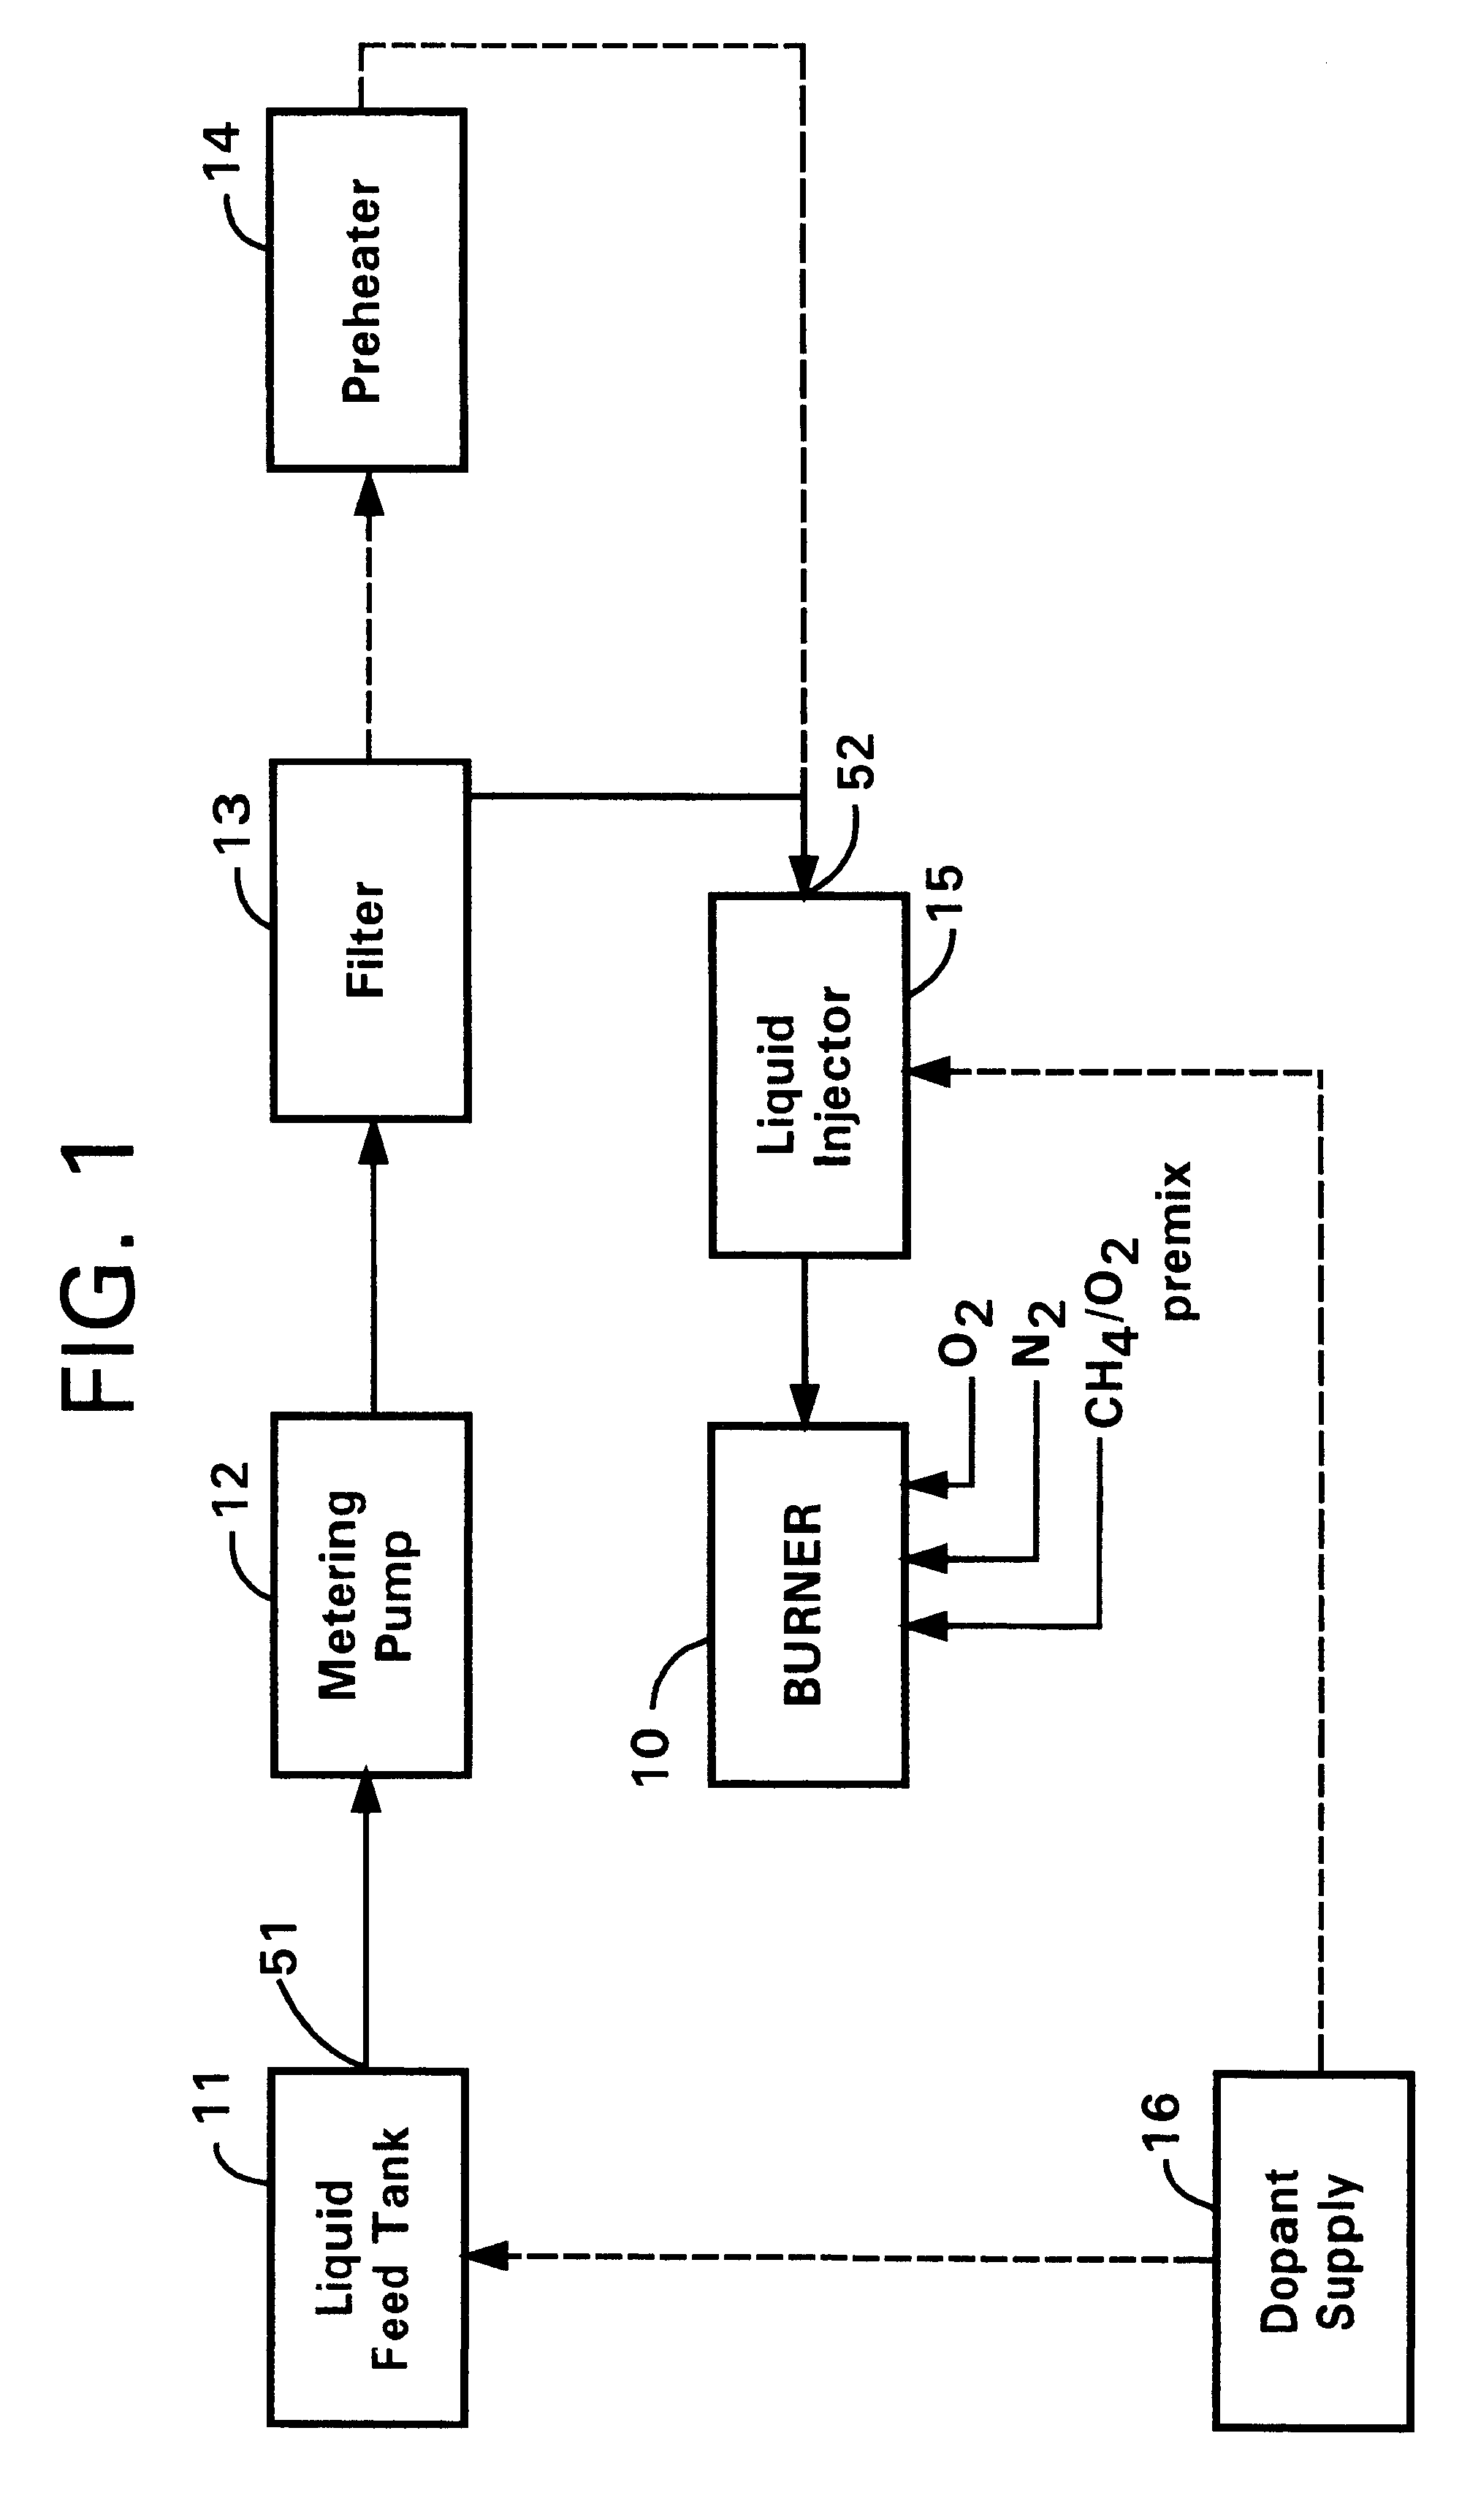 Method and apparatus for forming fused silica by combustion of liquid reactants